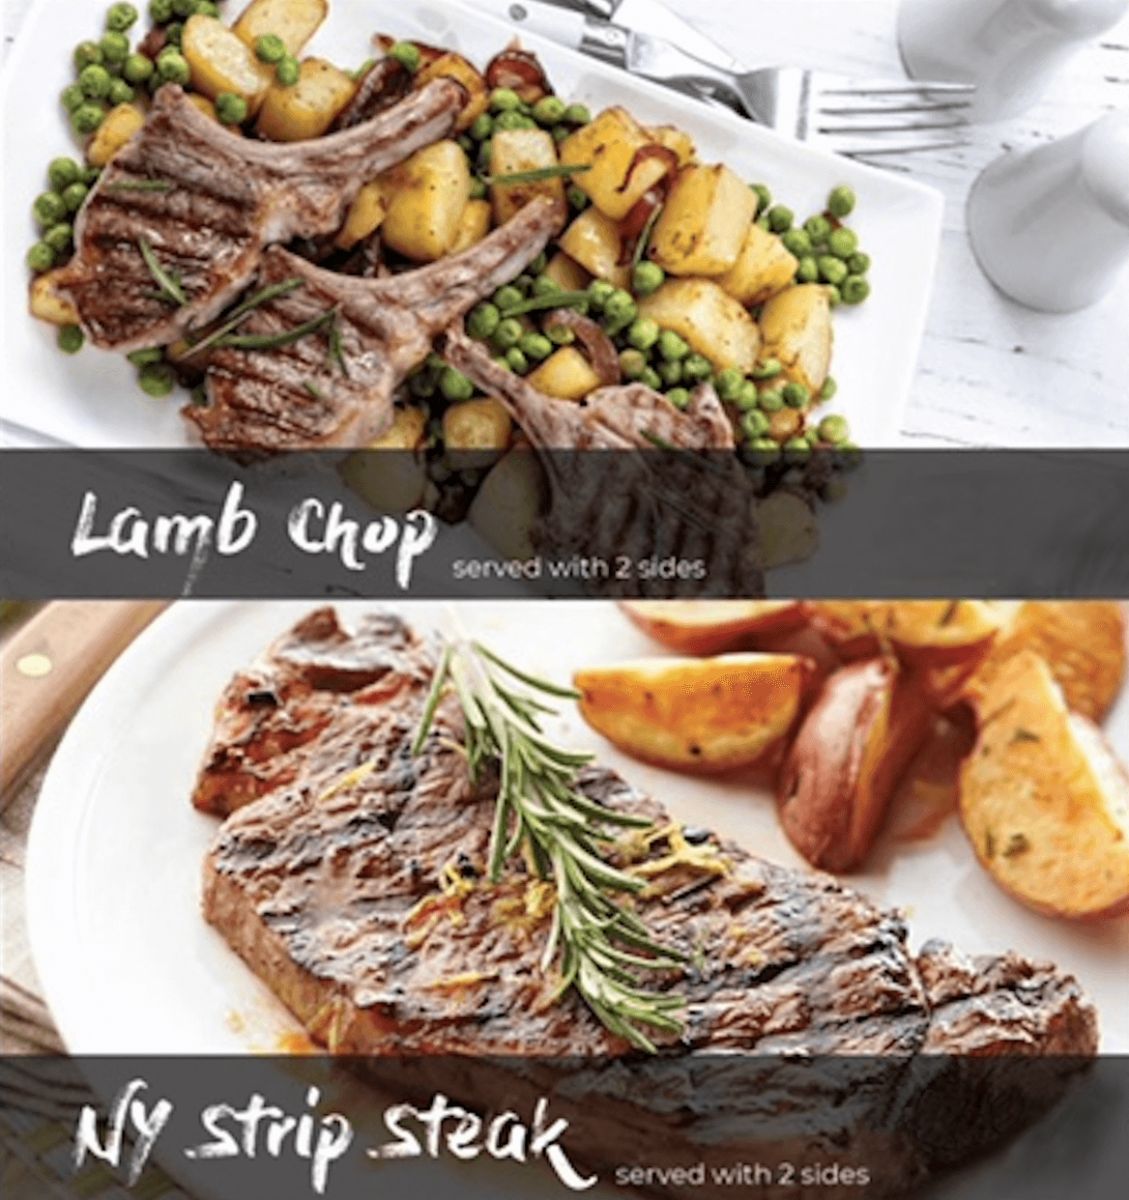 Lamb chop &18.99, NY Strip steak $18.99 - served with 2sides